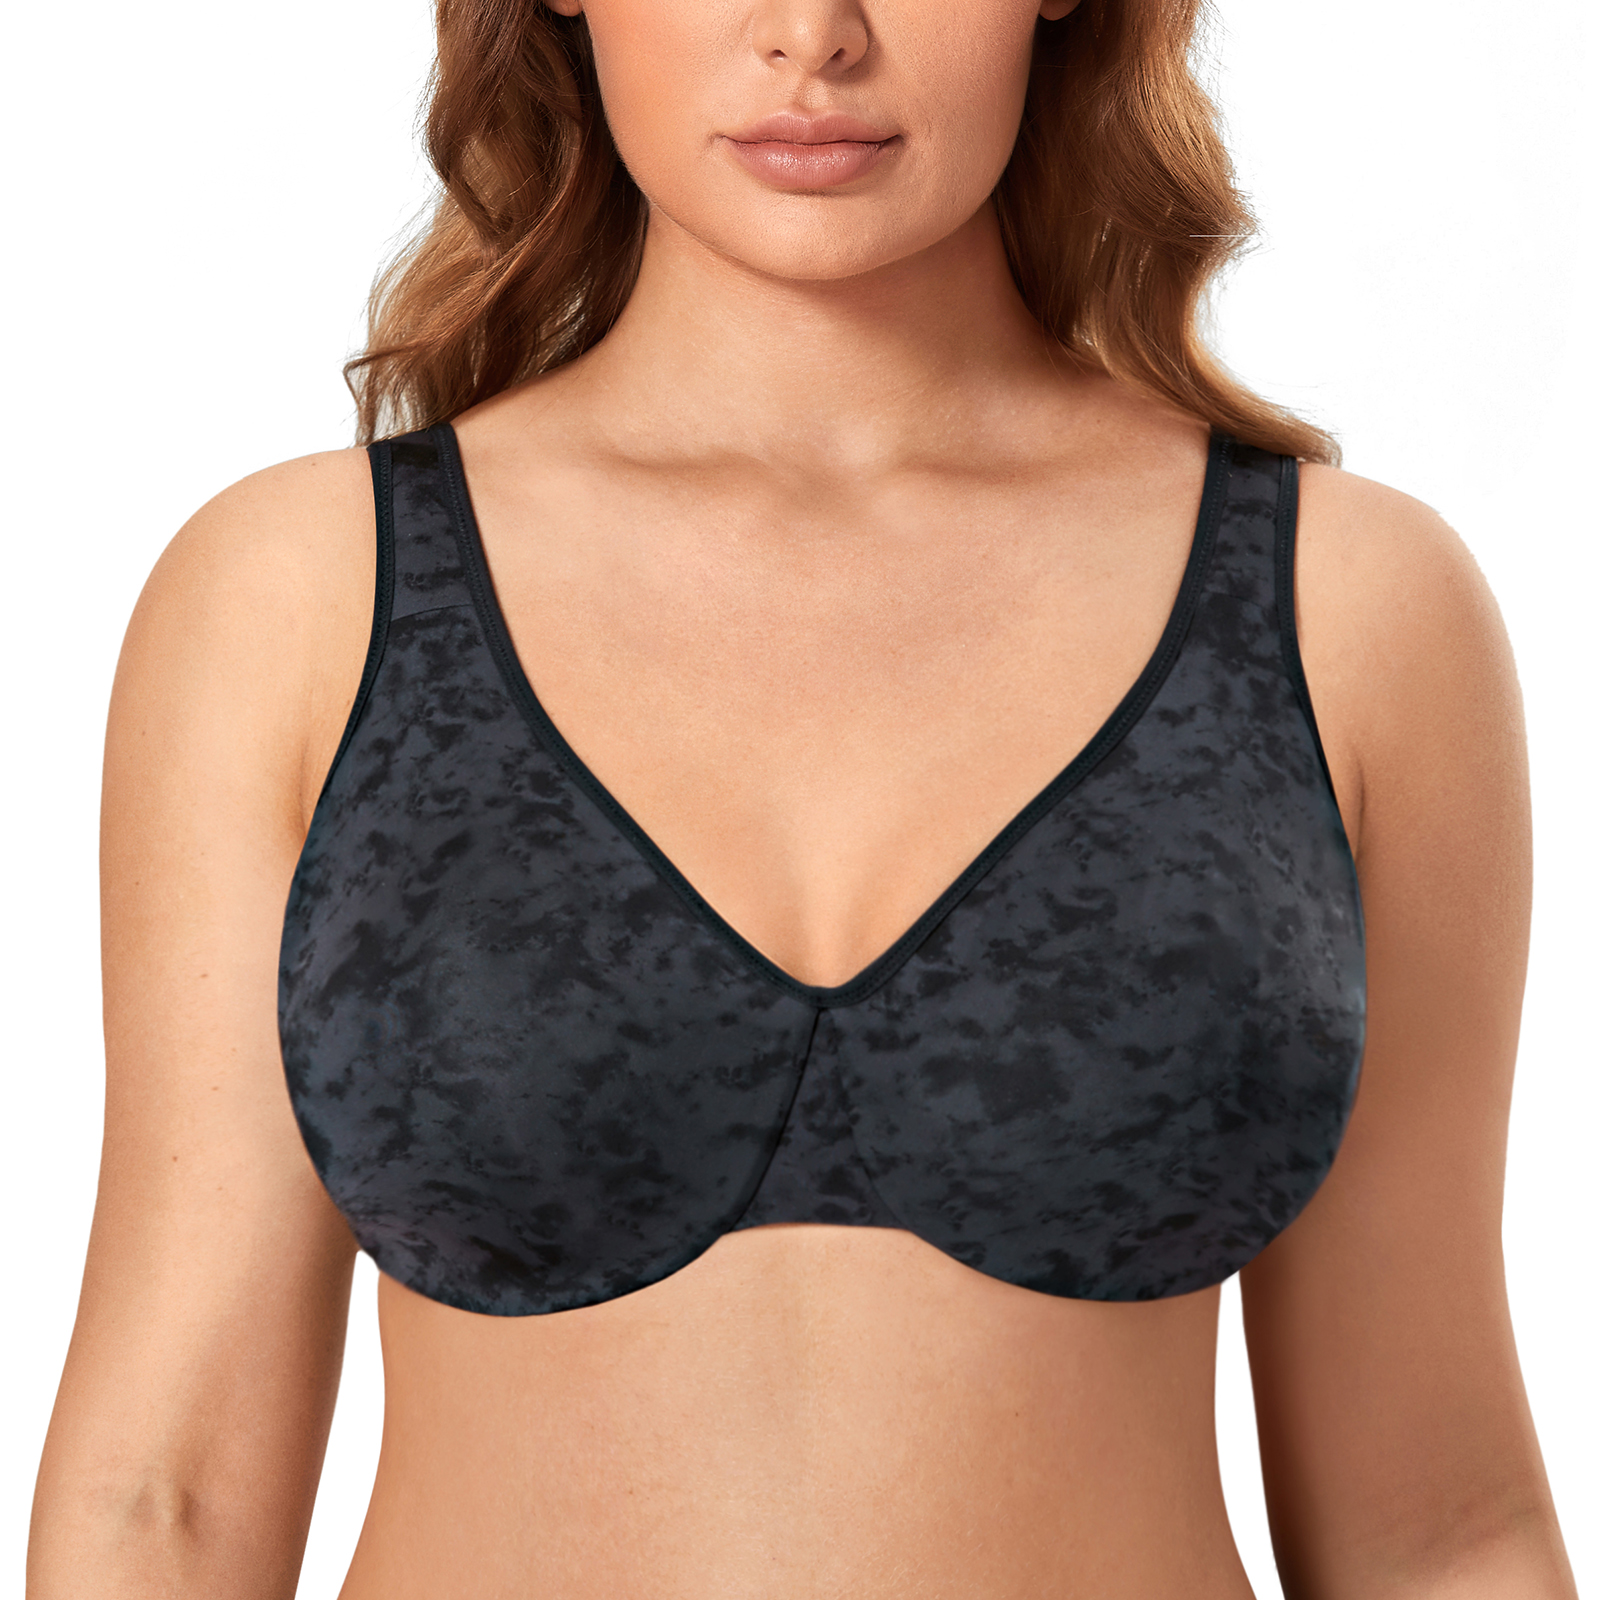 DELIMIRA Women's Smooth Full Figure Minimizer Underwire Support